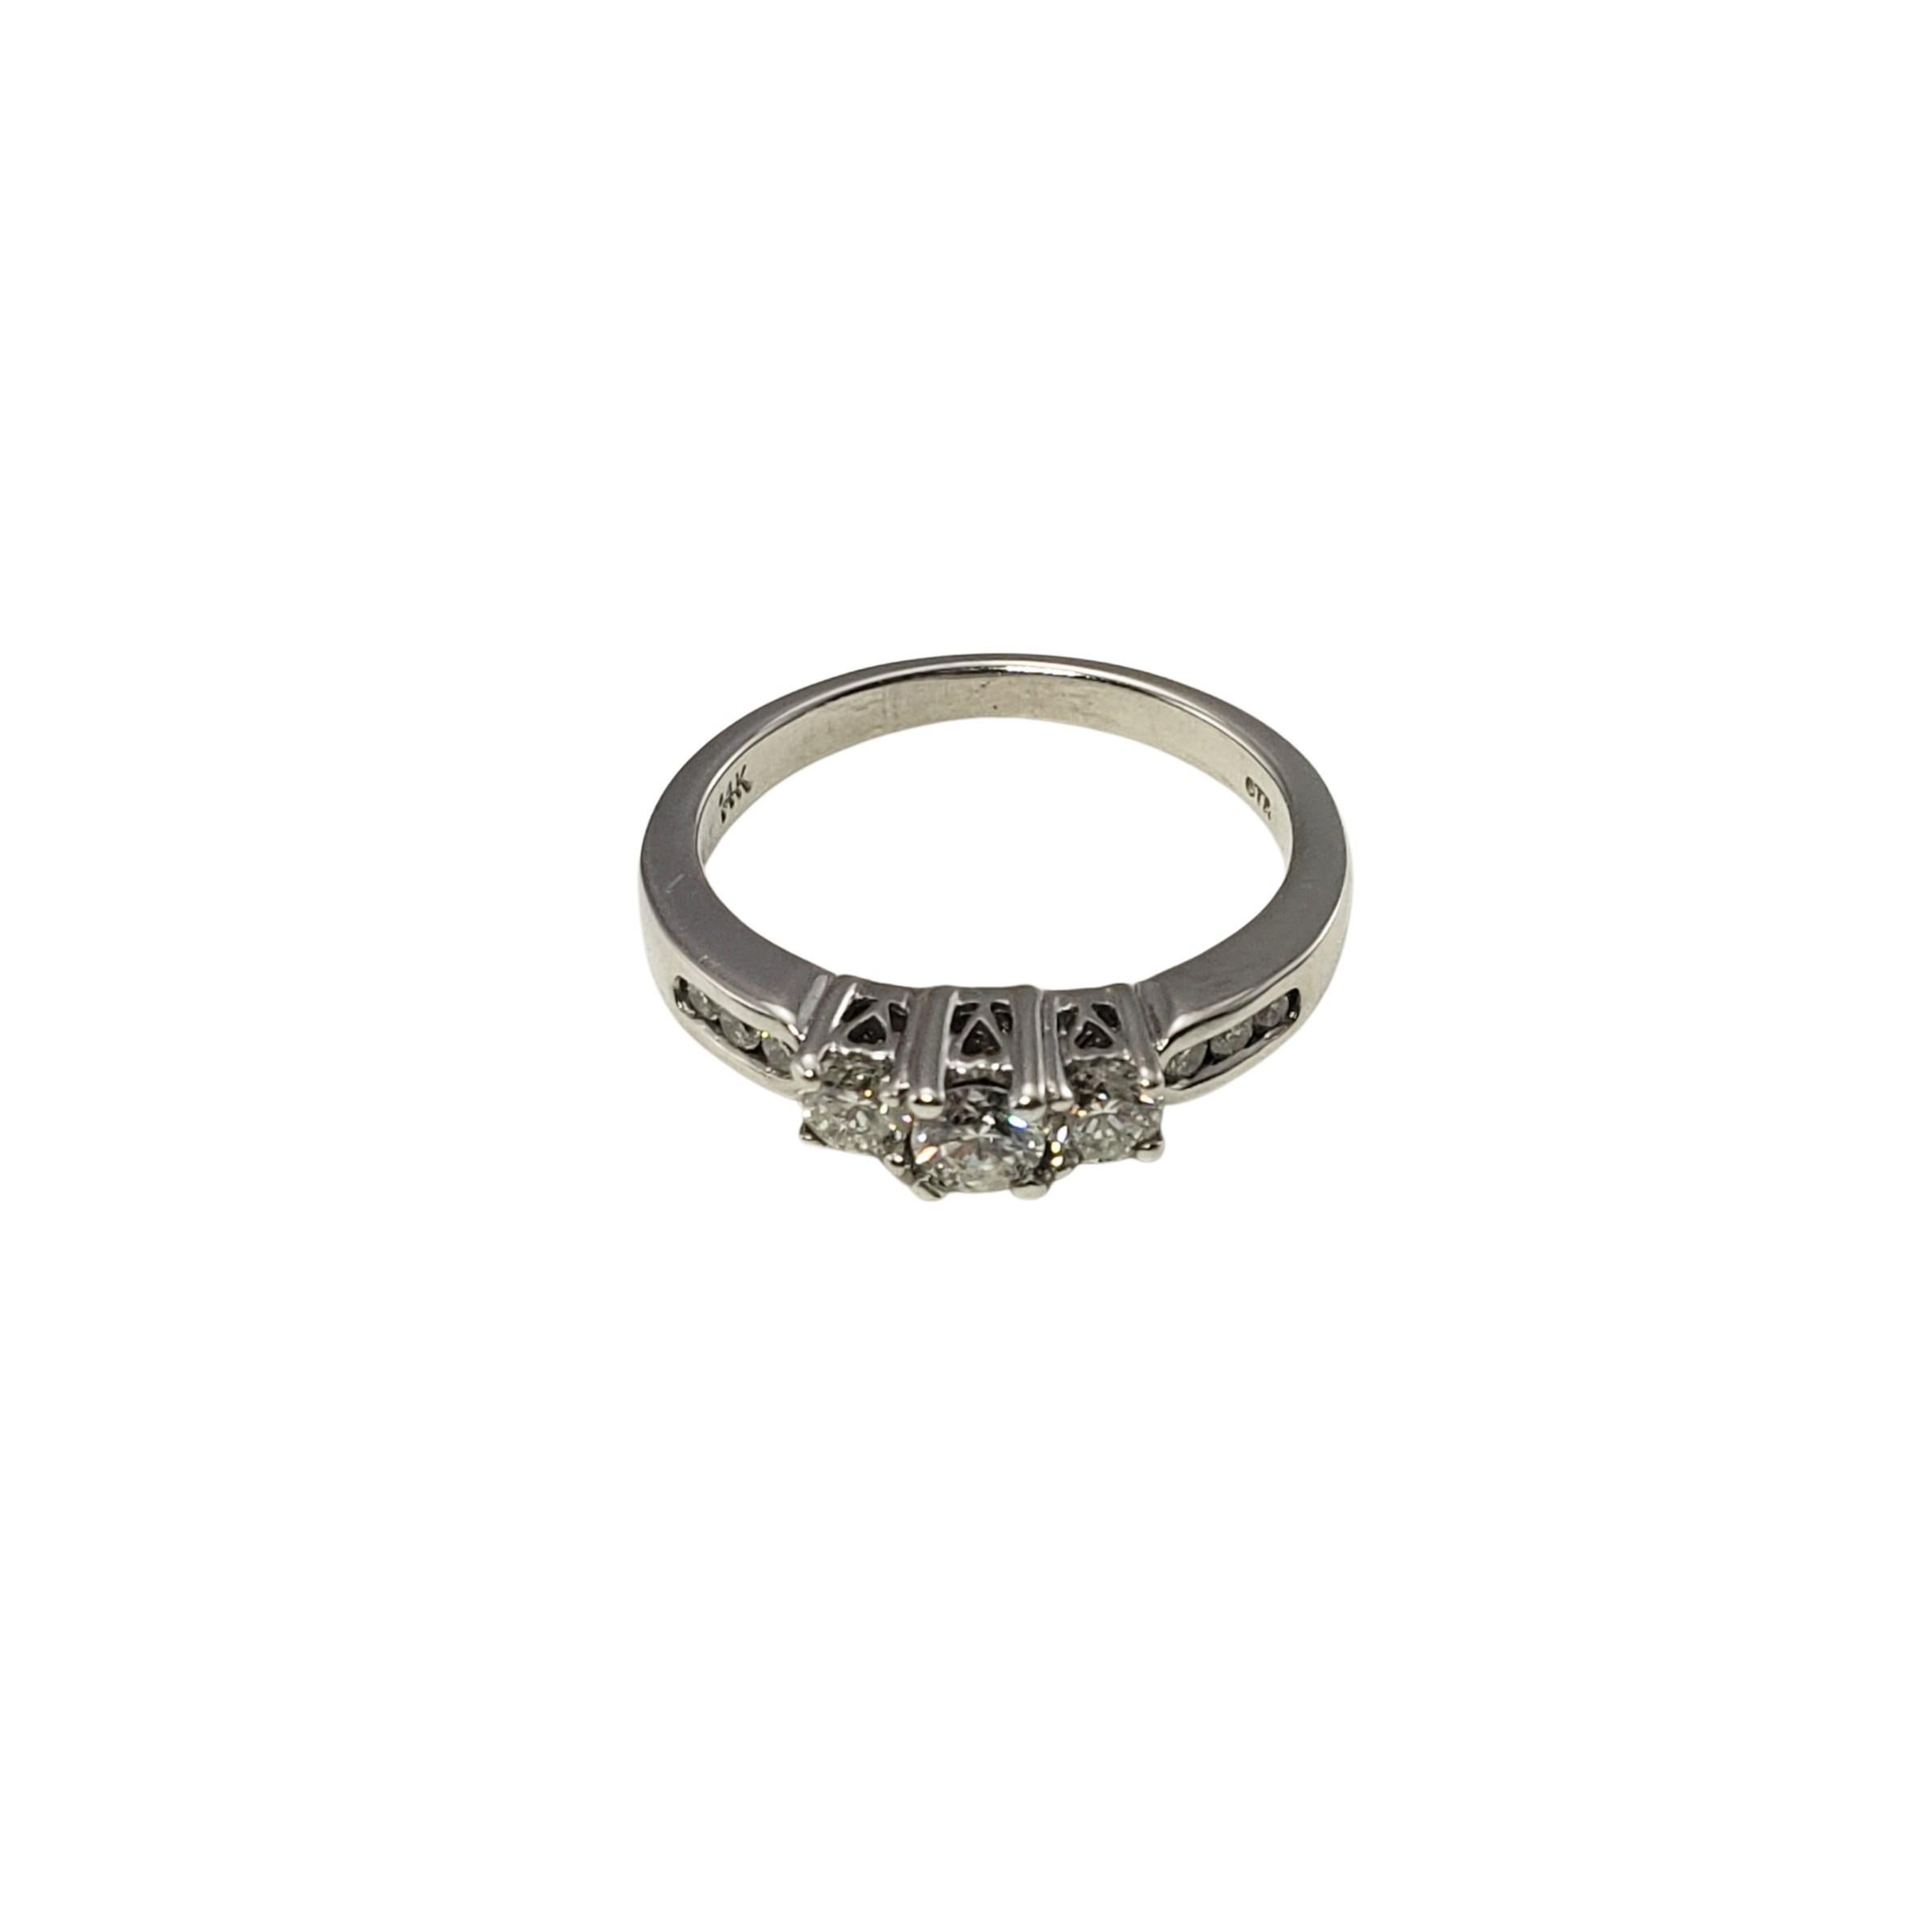 14 Karat White Gold and Diamond Past Present Future Ring Size 5.5-

This sparkling ring features nine round brilliant cut diamonds (center: .12 ct., two side stones: .04 ct. each) set in beautifully detailed 14K white gold.  Inner engraving